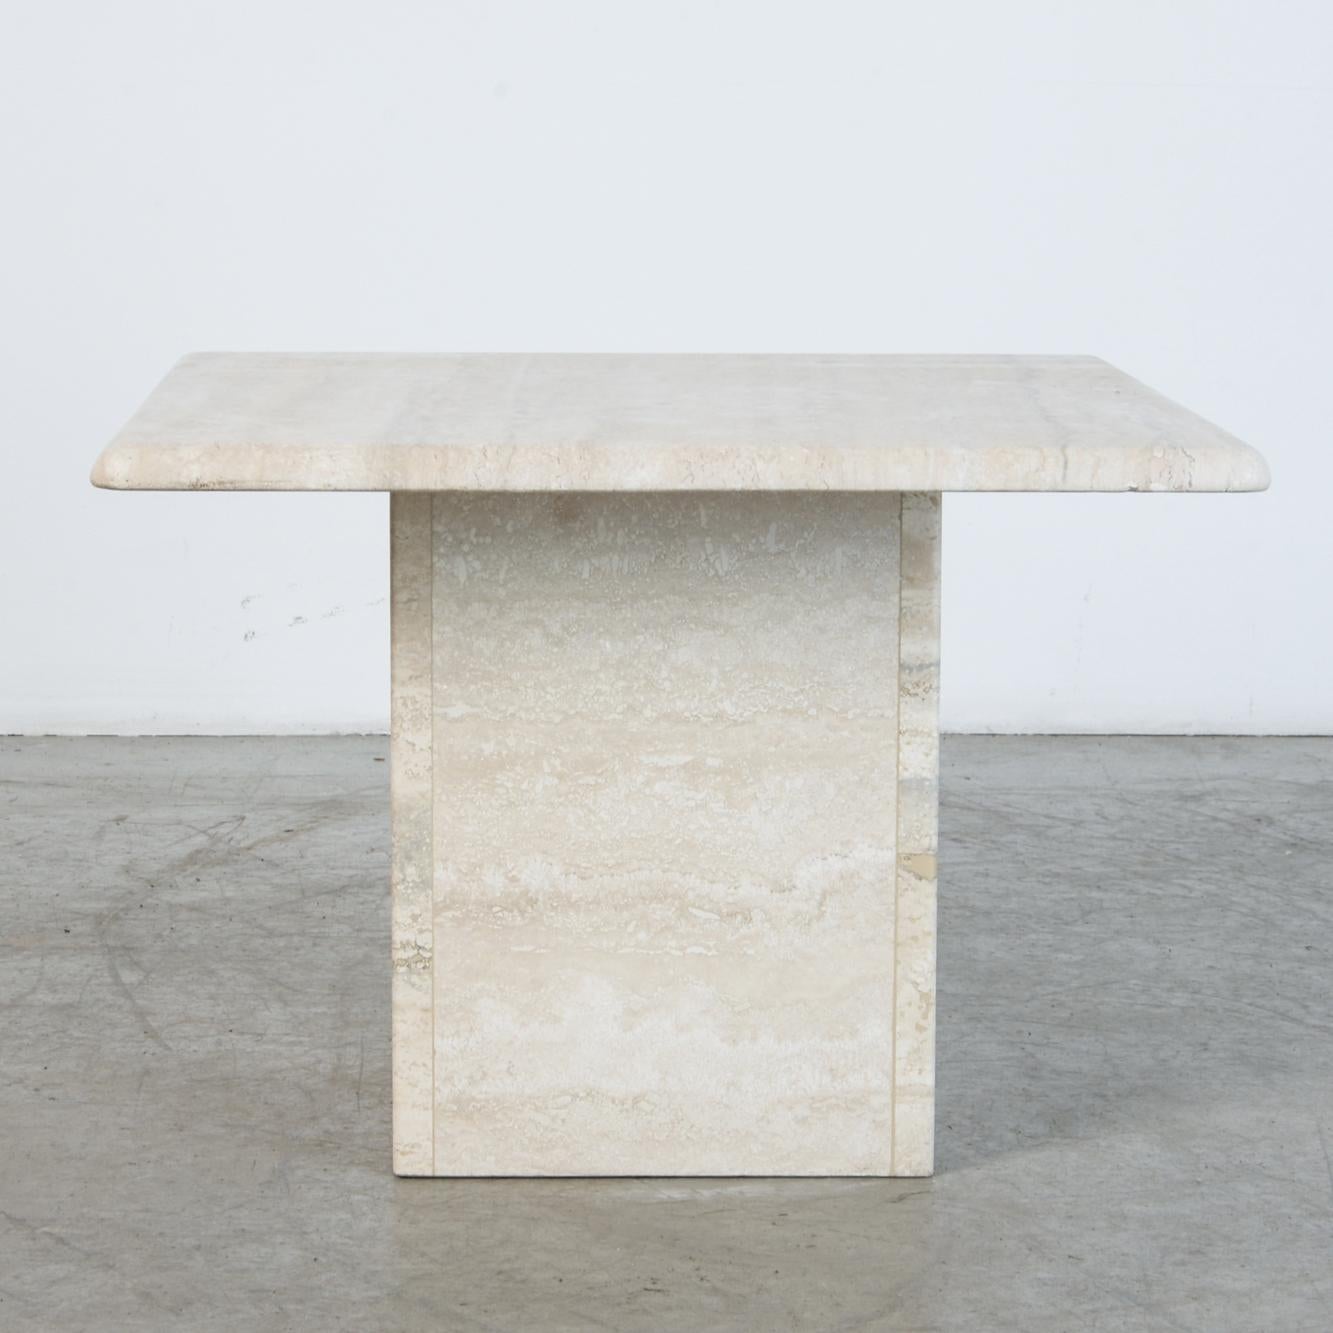 A refined travertine coffee table or pedestal, with rounded square top and base. A material rich in itself, echoing classical sculpture. Associations from antiquity to 1970s kitsch, this is a piece that truly fits in any space. At a modestly scaled